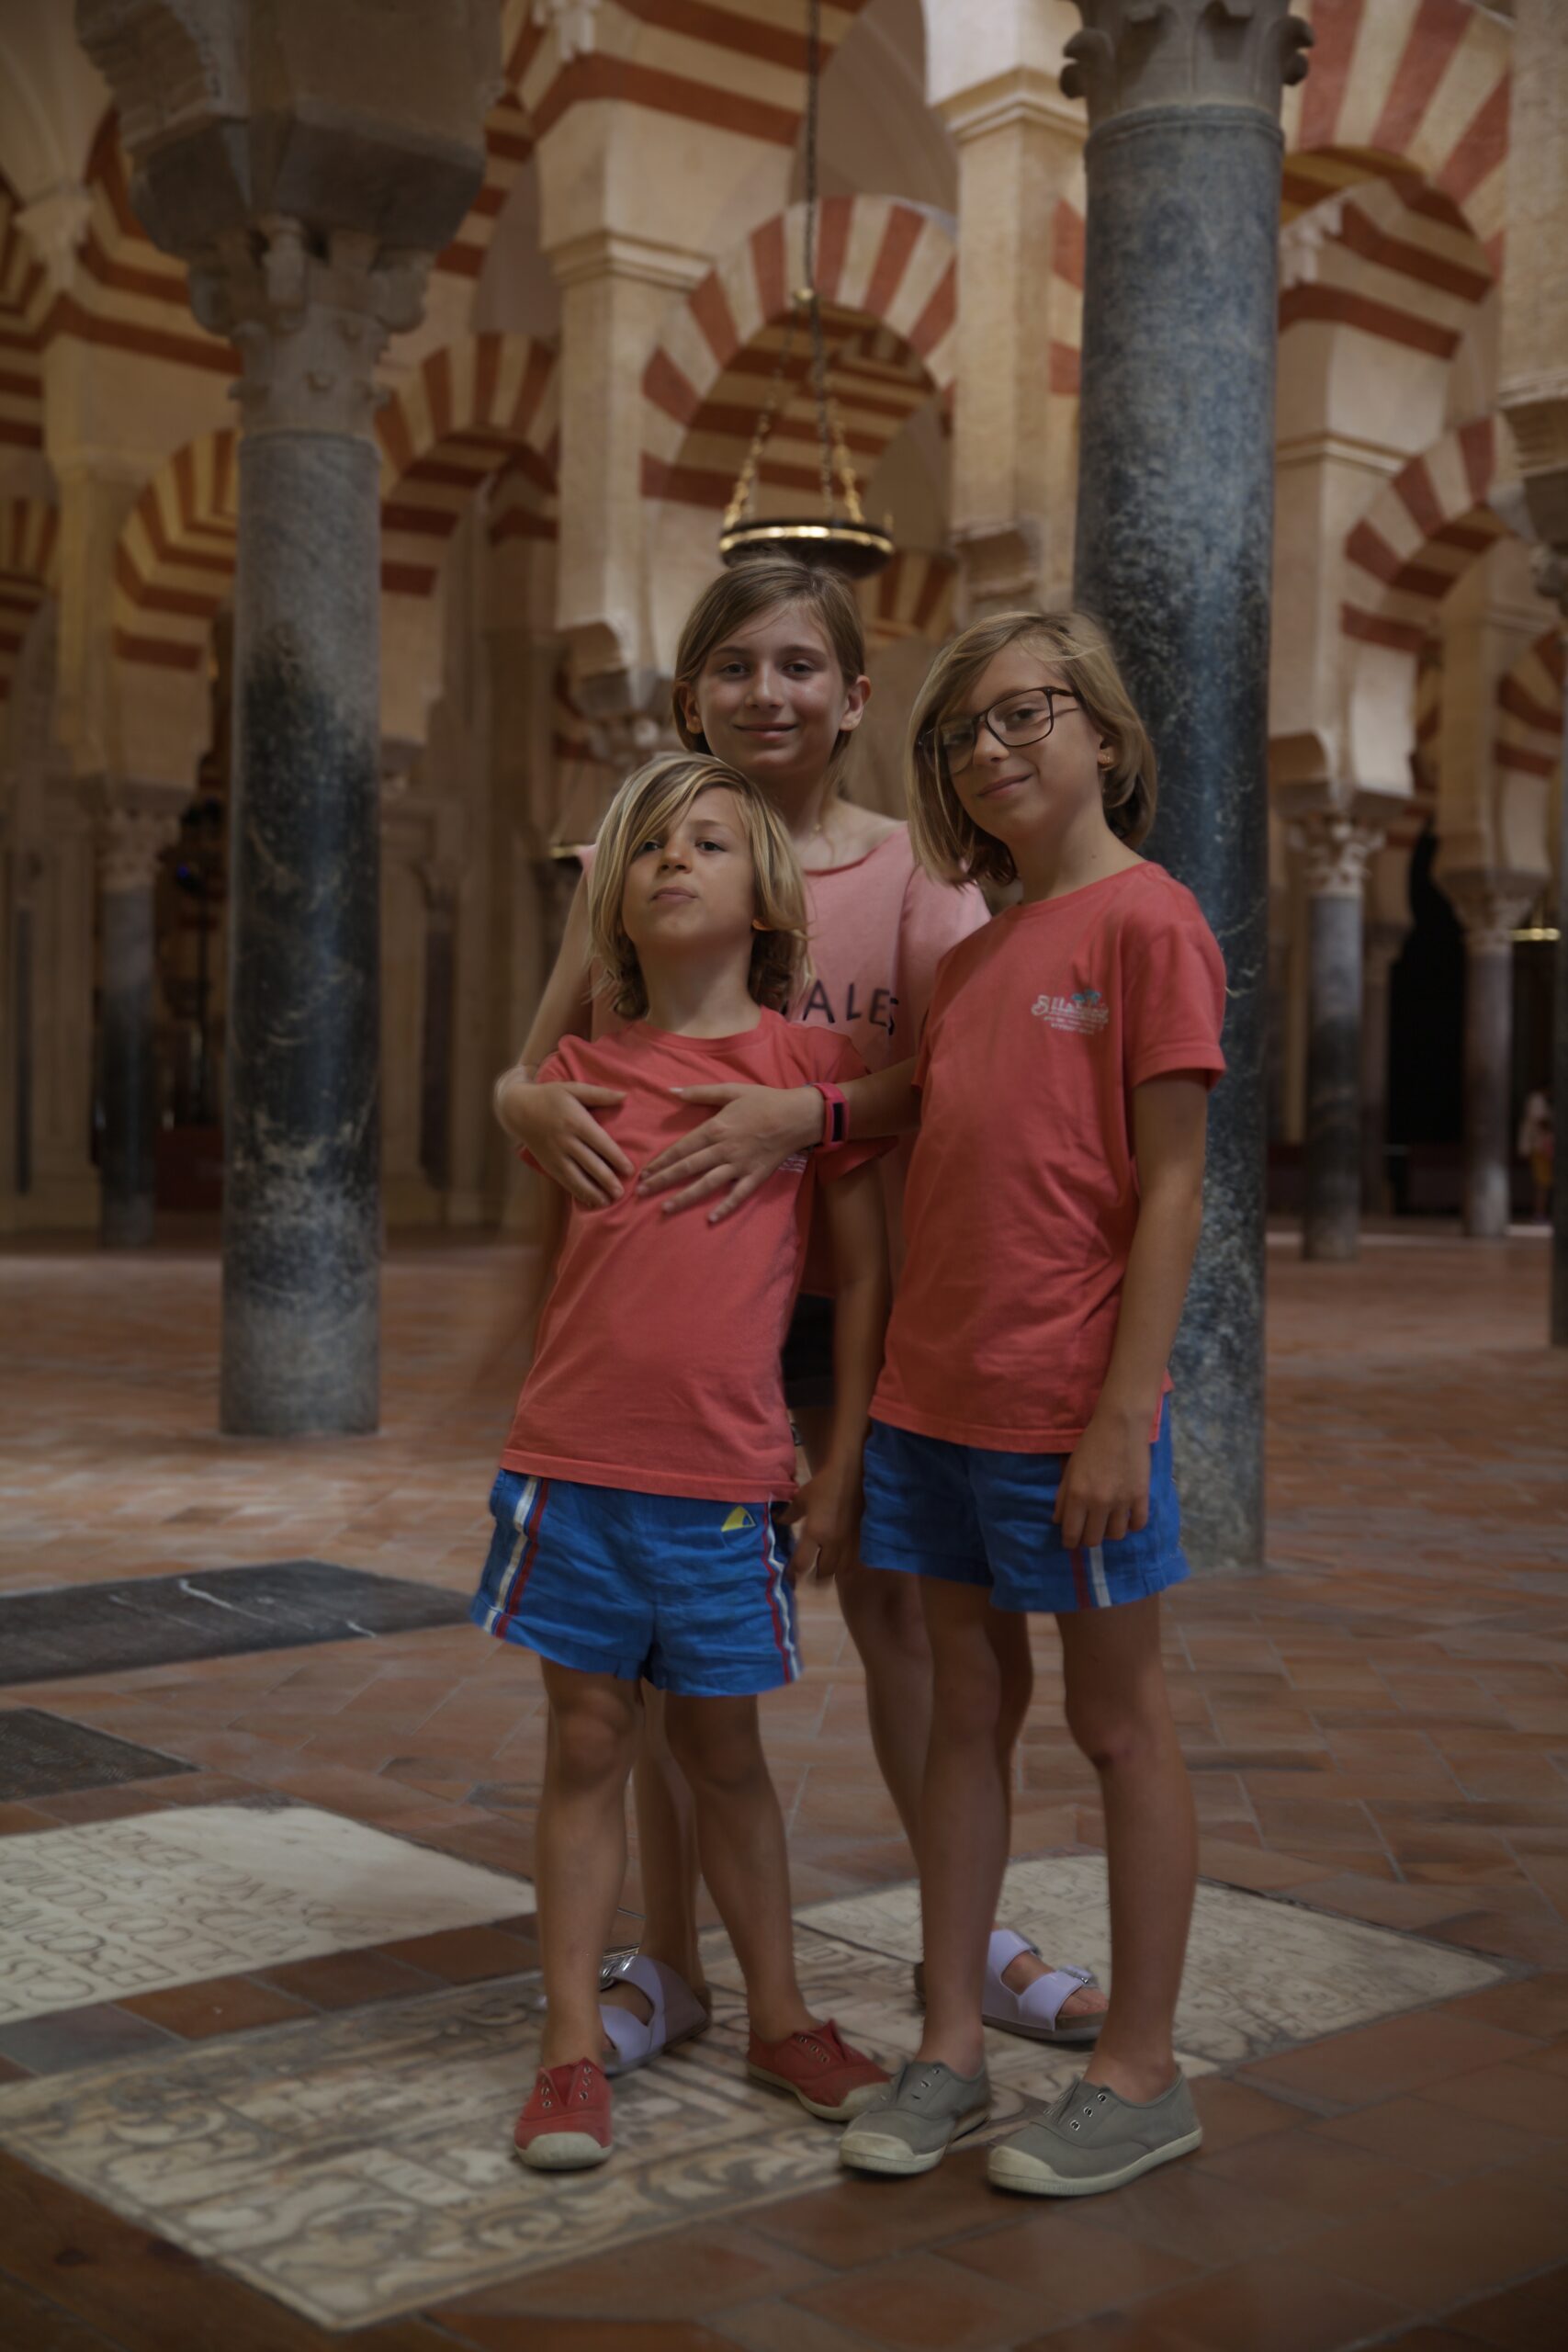 Mosque-cathedral Cordoba Spain with kids